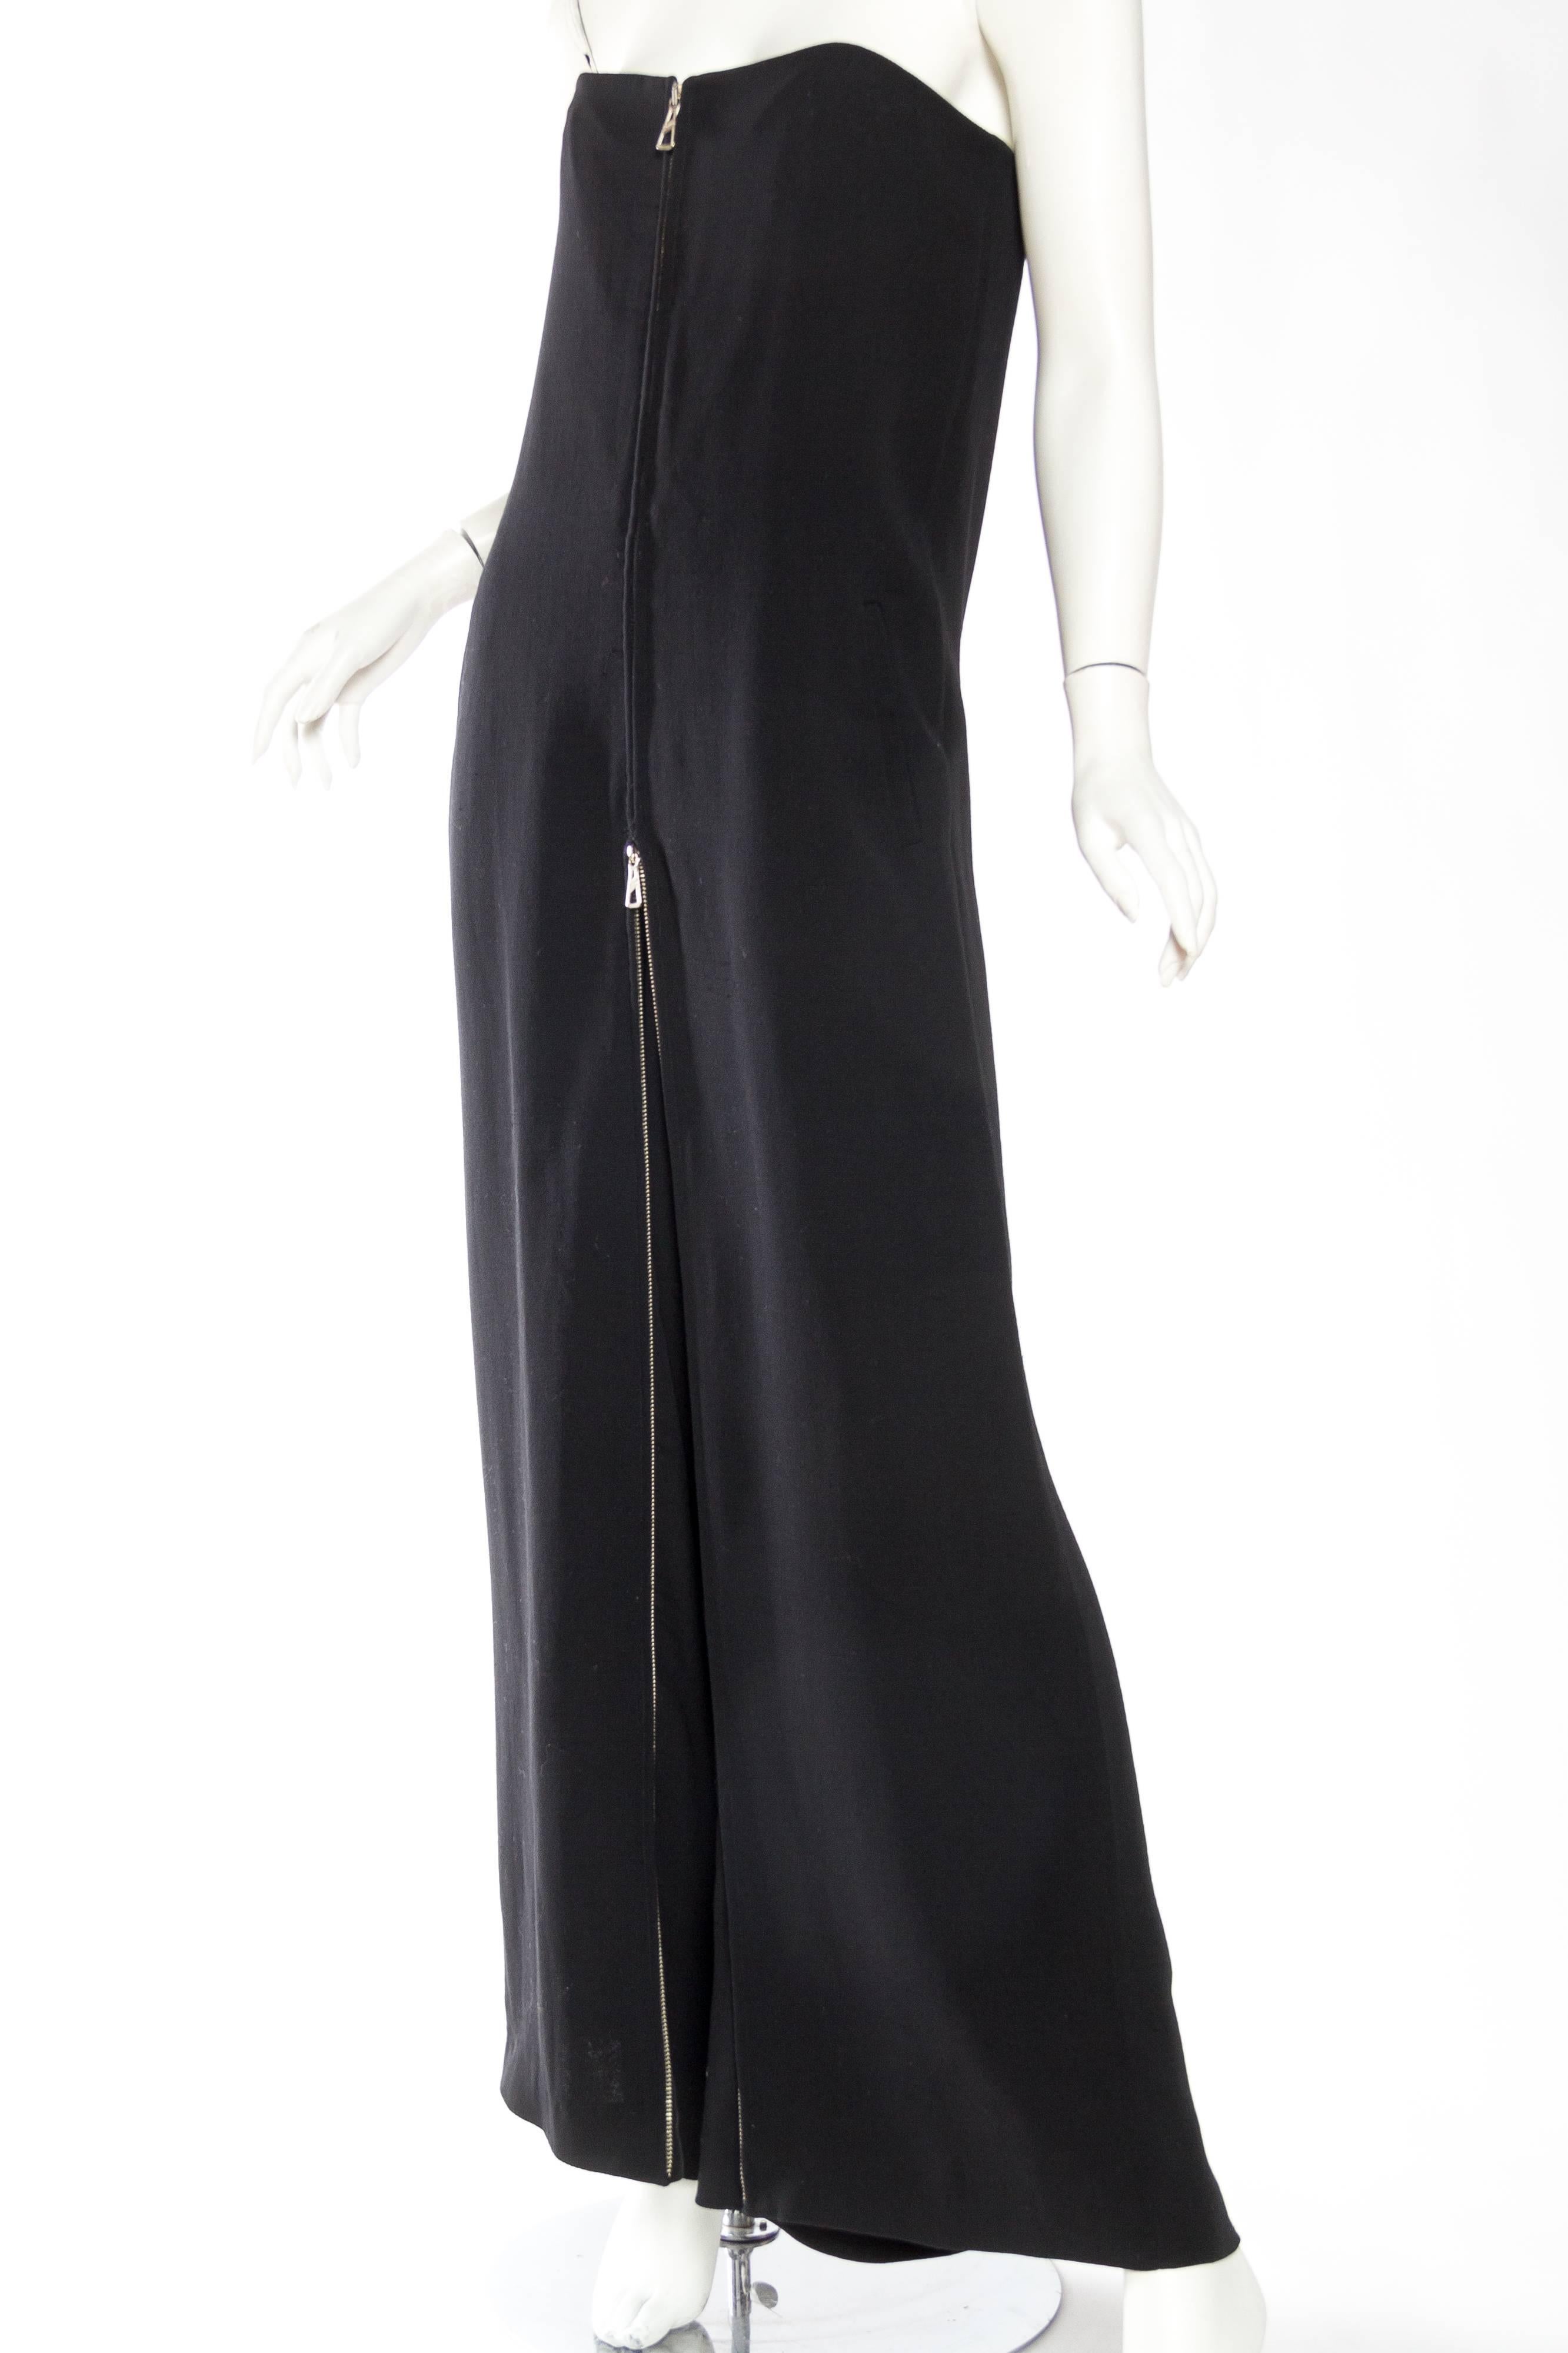 2000S JEAN PAUL GAULTIER Black Jumpsuit , Central Zipper Turns It Into A Dress In Excellent Condition For Sale In New York, NY